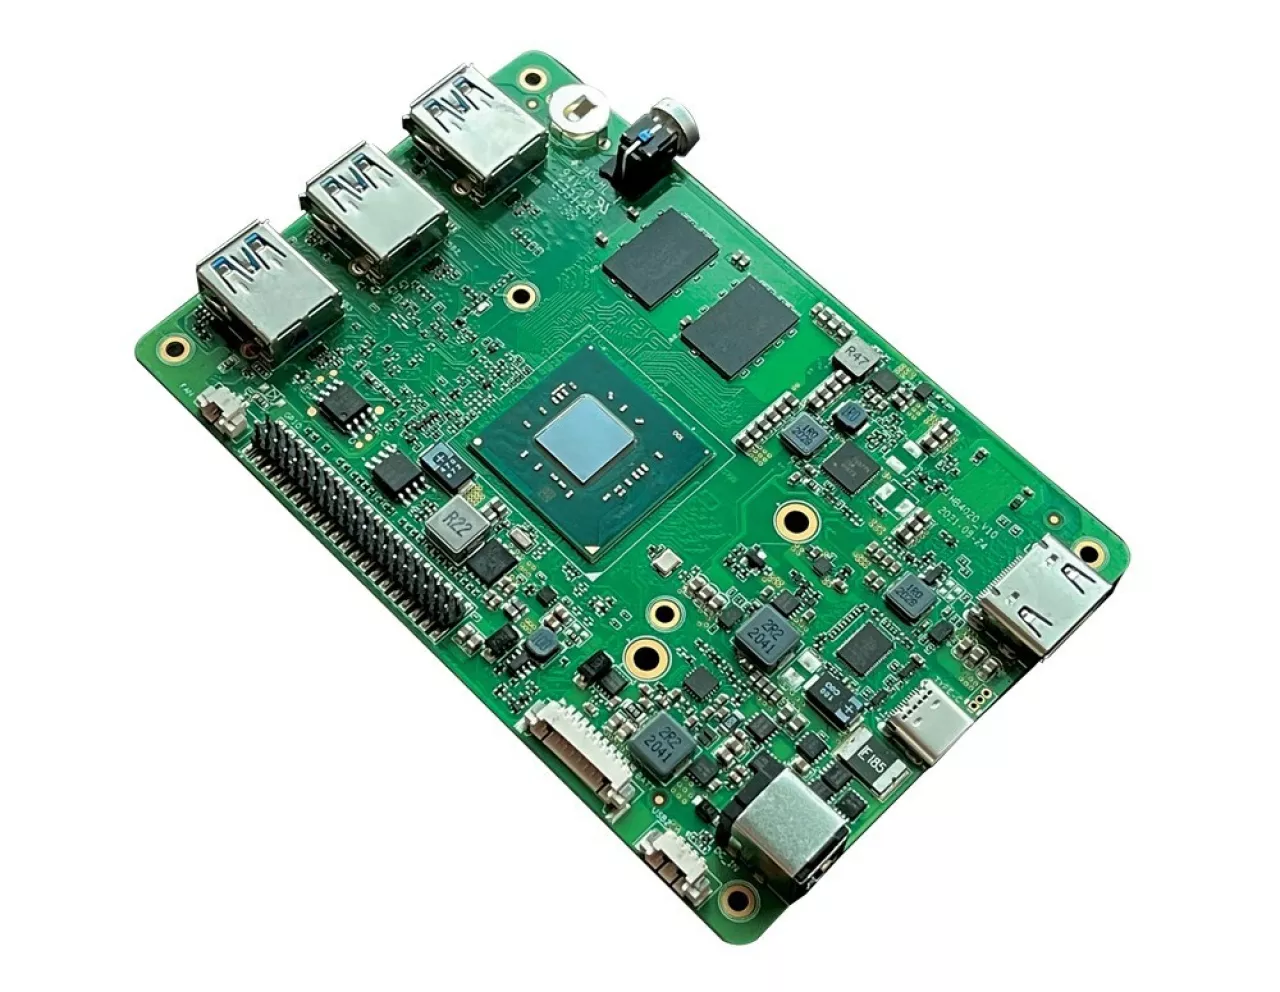 HACKBOARD TACKLES THE WIDENING DIGITAL DIVIDE AND IoT WITH POWERFUL AND AFFORDABLE WINDOWS AND INTEL BASED SINGLE BOARD COMPUTER (SBC)